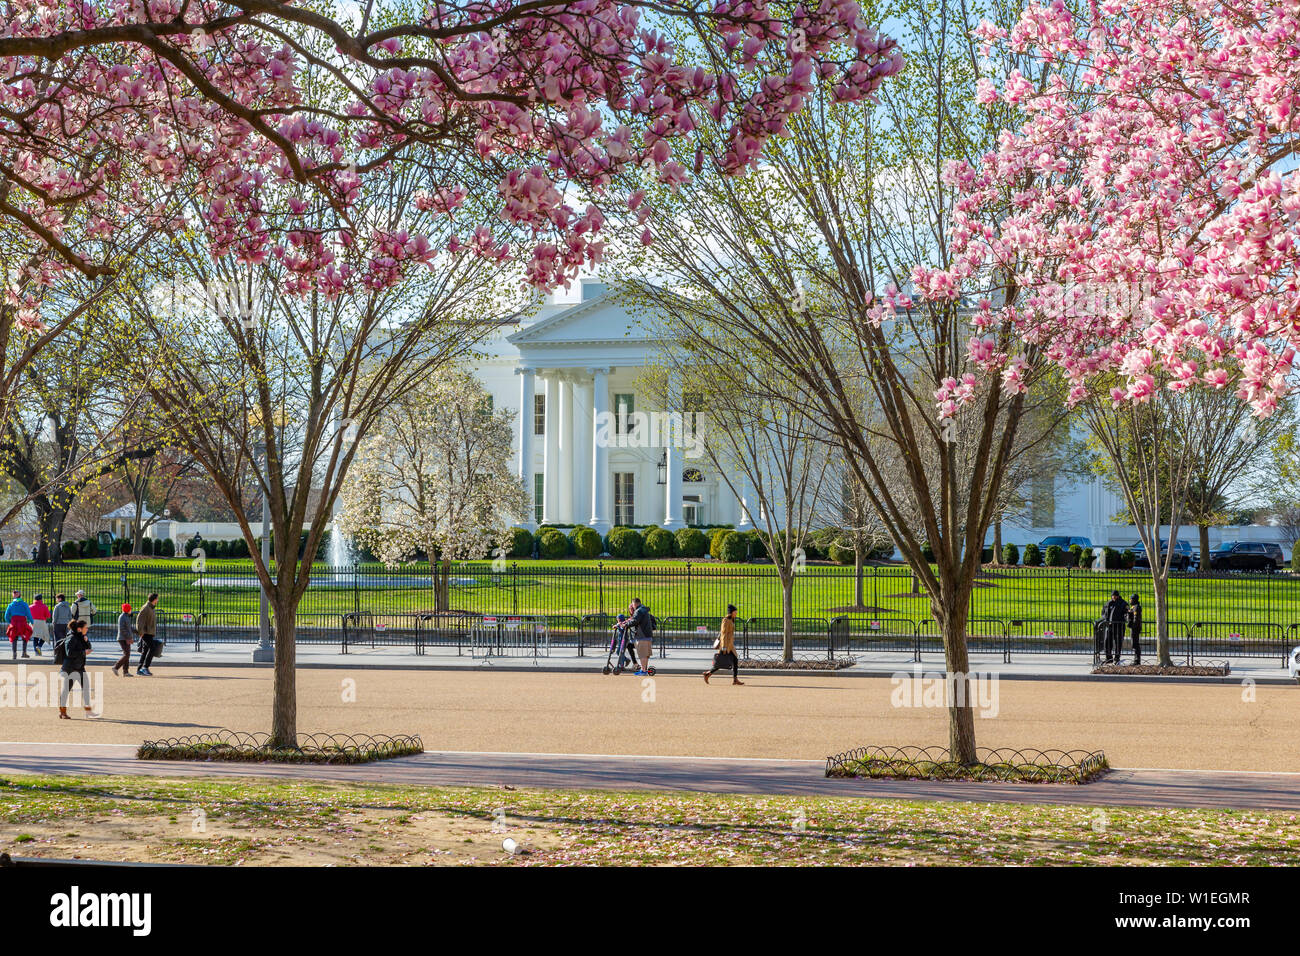 View of The White House and spring blossom in Lafayette Square, Washington D.C., United States of America, North America Stock Photo